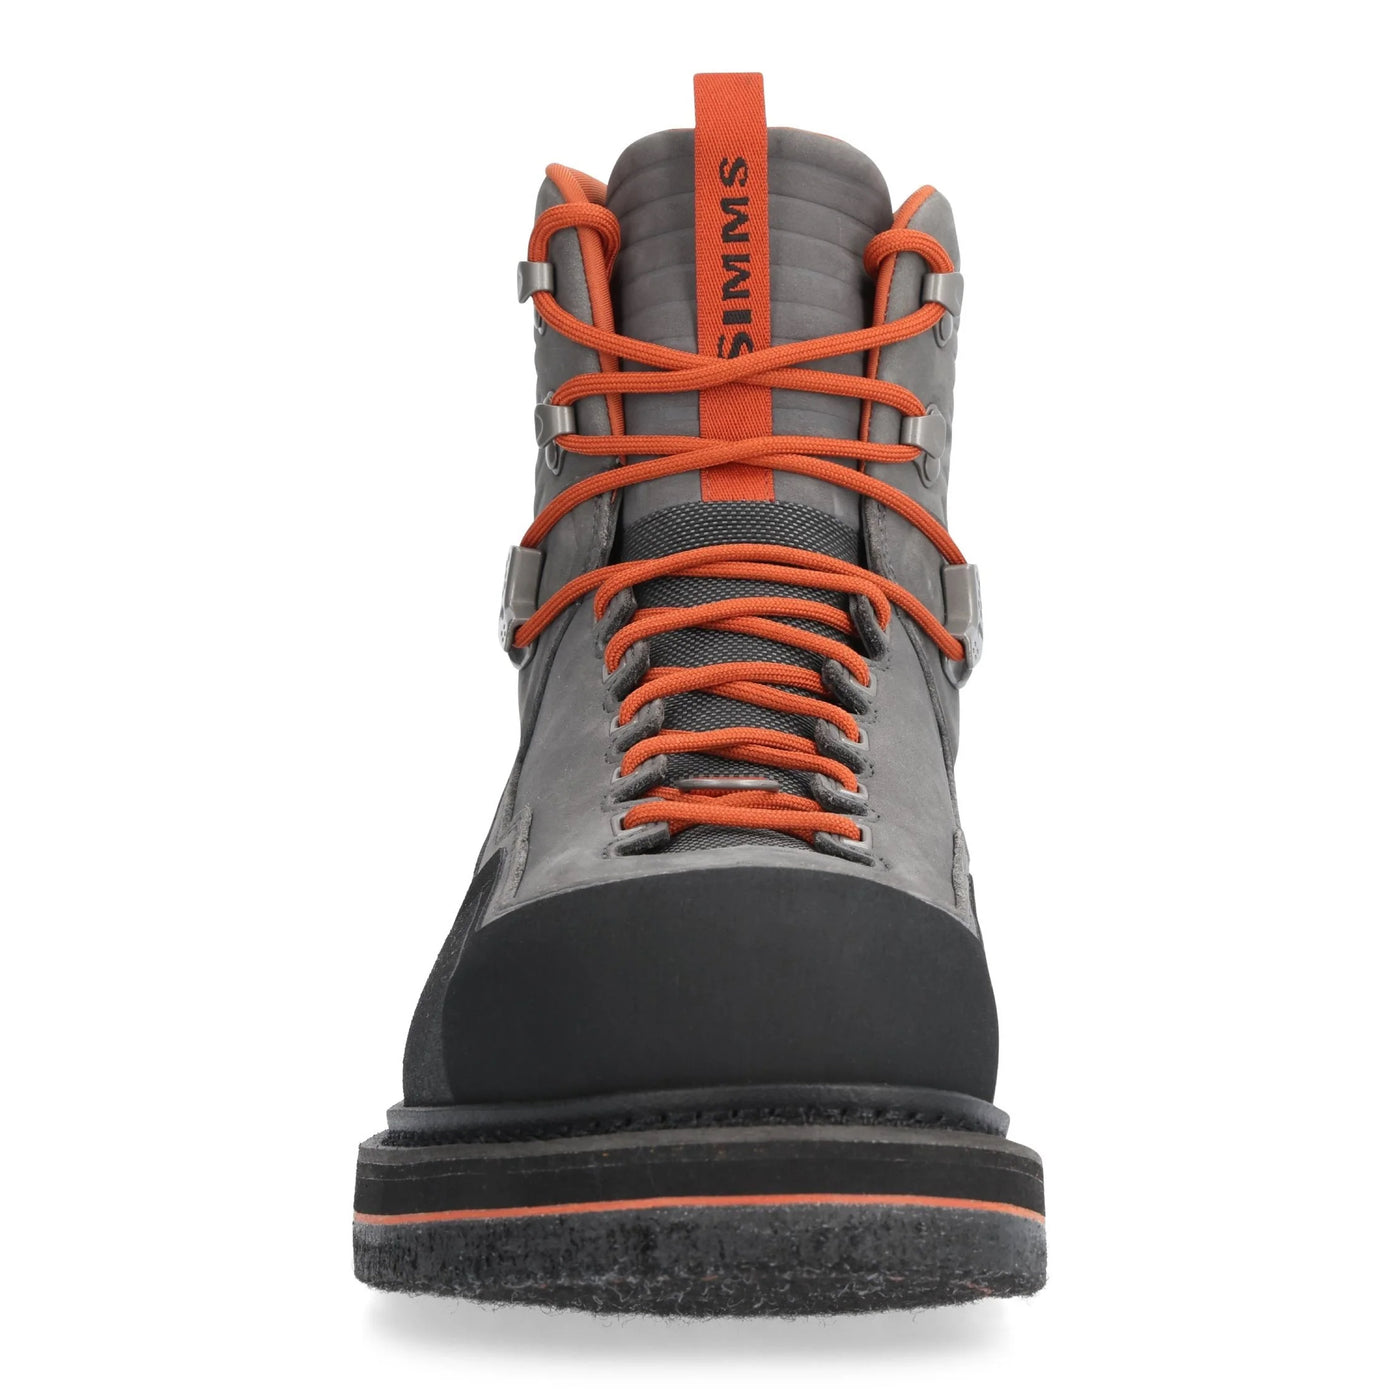 Simms Fly Weight Access and Guide Boa Boots